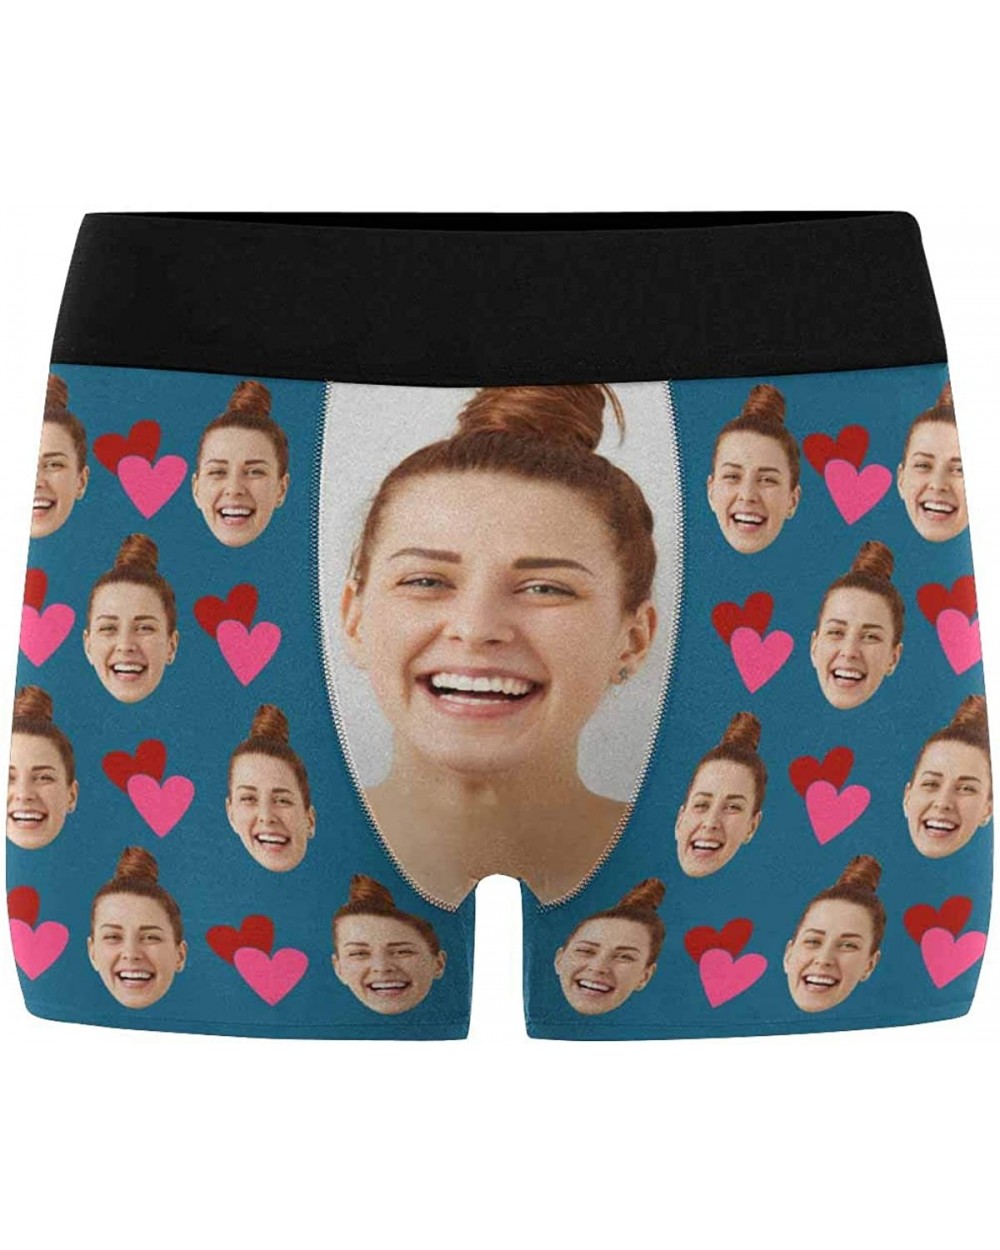 Custom Face Boxers Pink and Red Hearts Wife Faces White Personalized Face Briefs Underwear for Men - Multi 5 - C118A40968K $4...